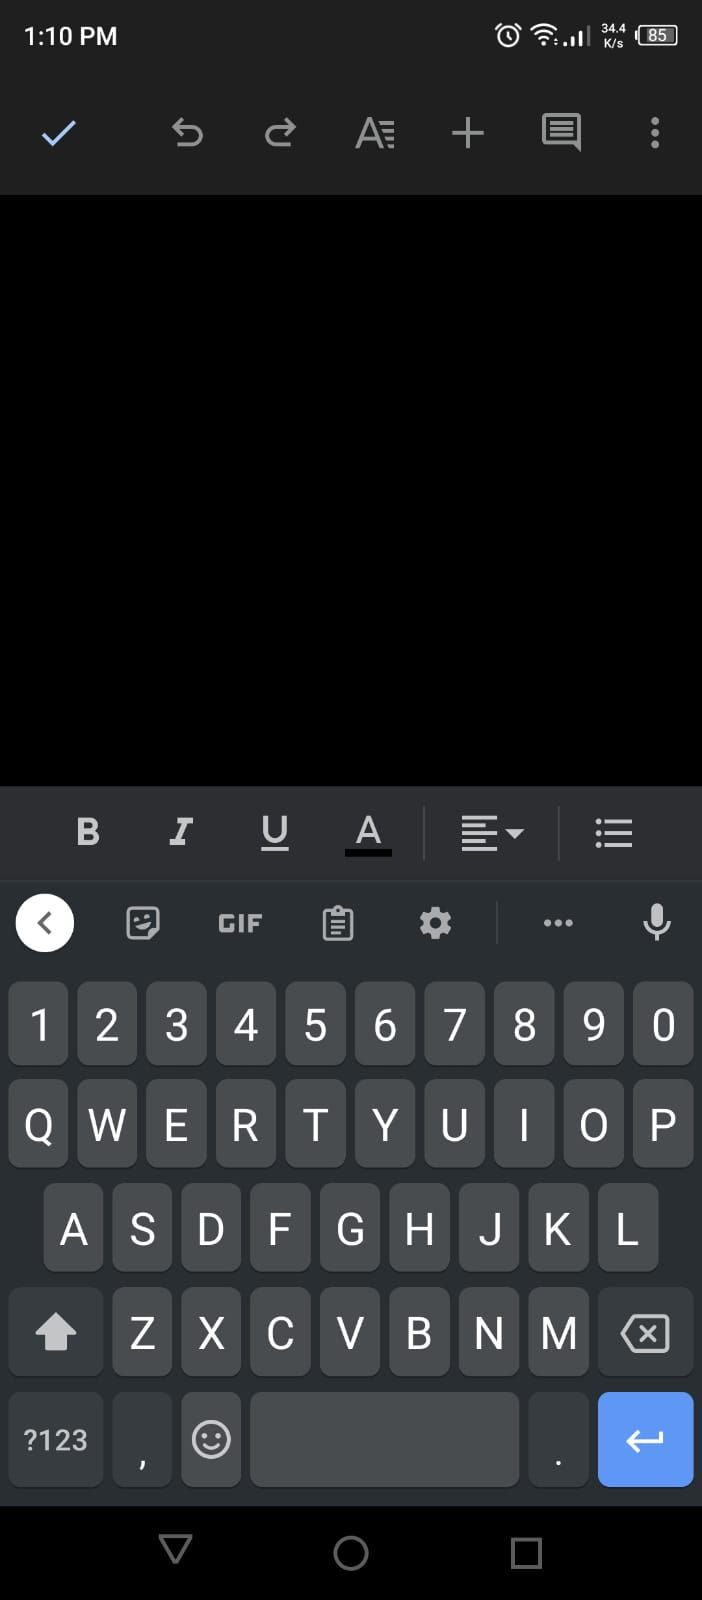 Opening Gboard in any App